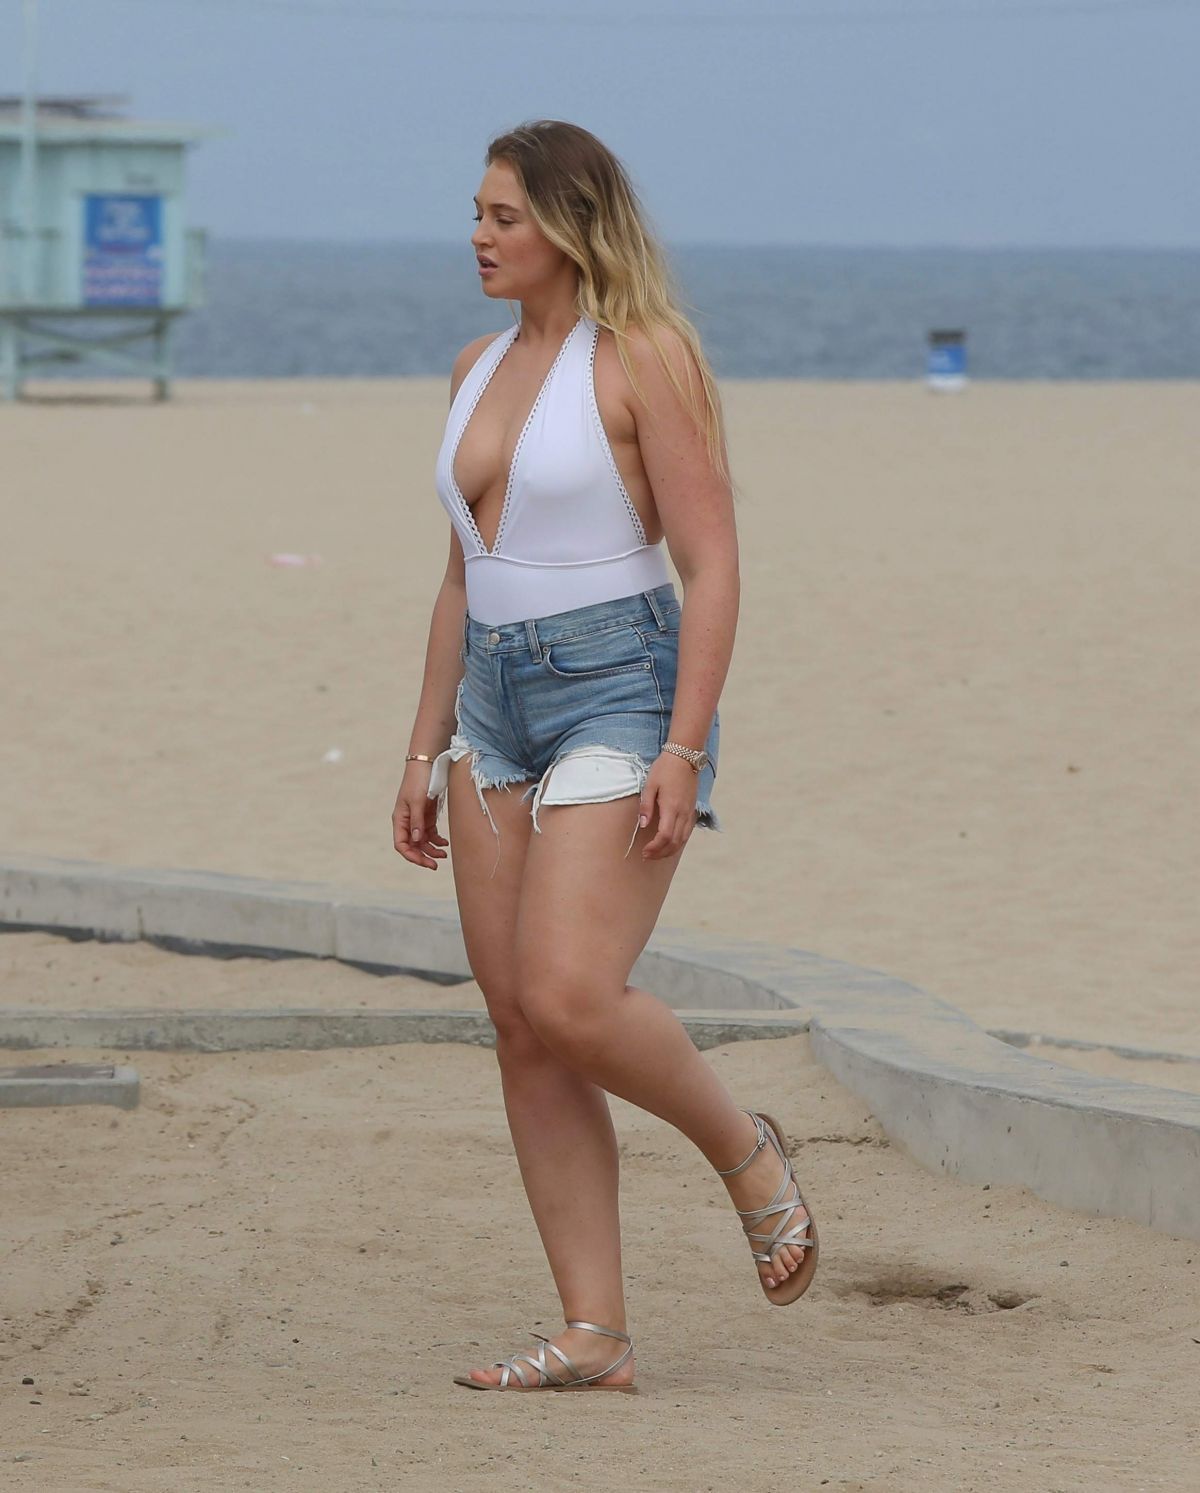 Iskra Lawrence Filming At Venice Beach Iskra Lawrence 1